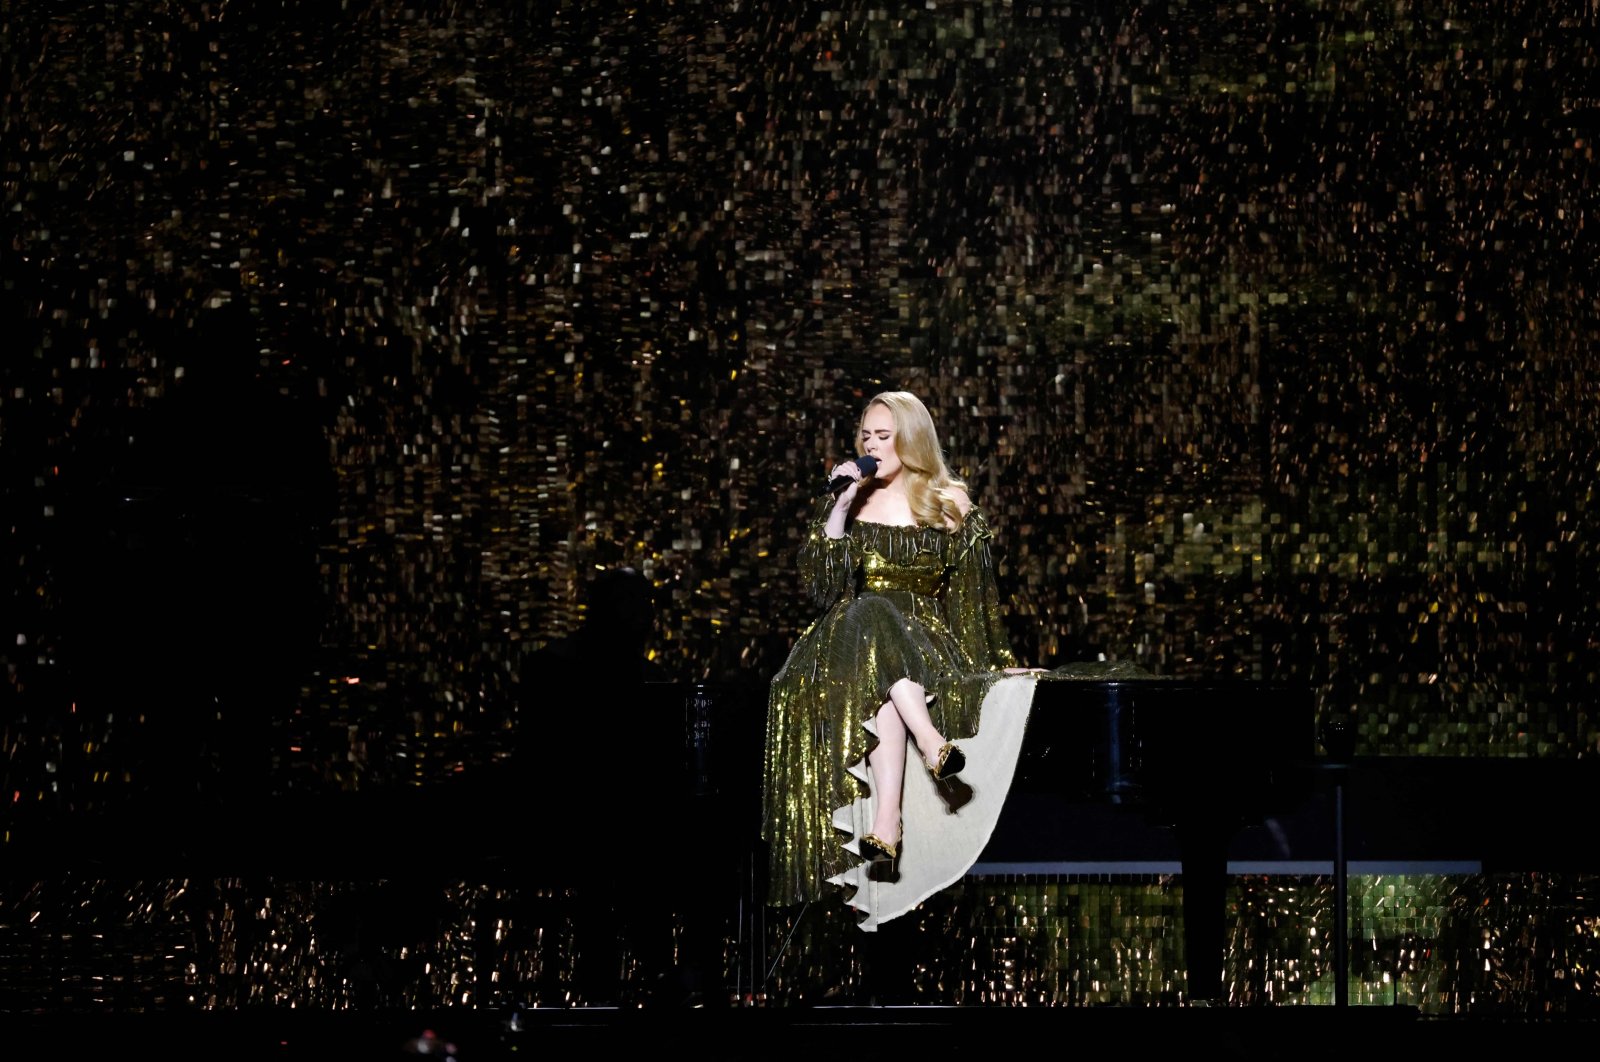 British singer Adele Laurie Blue Adkins, aka Adele, performs during the BRIT Awards 2022 ceremony and live show in London, Britain, Feb. 8, 2022. (AFP)